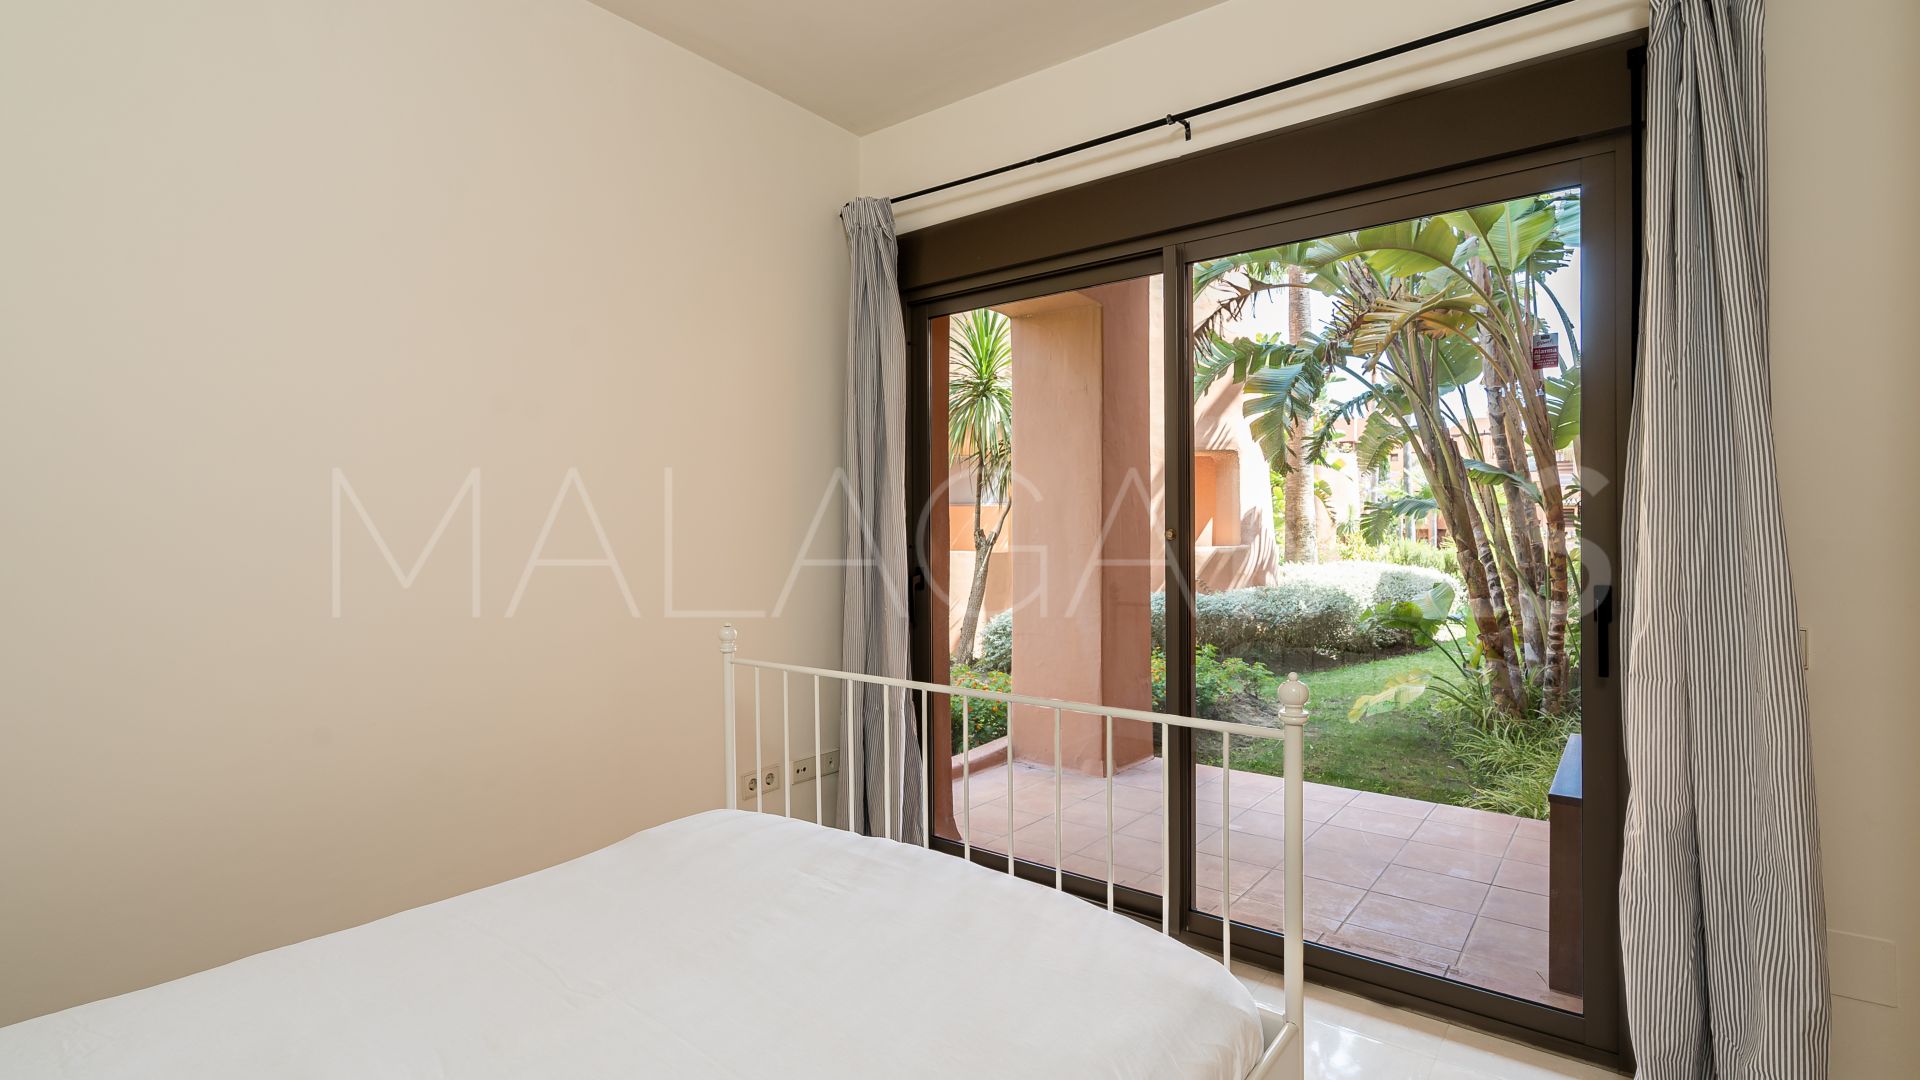 For sale ground floor apartment in Sotoserena